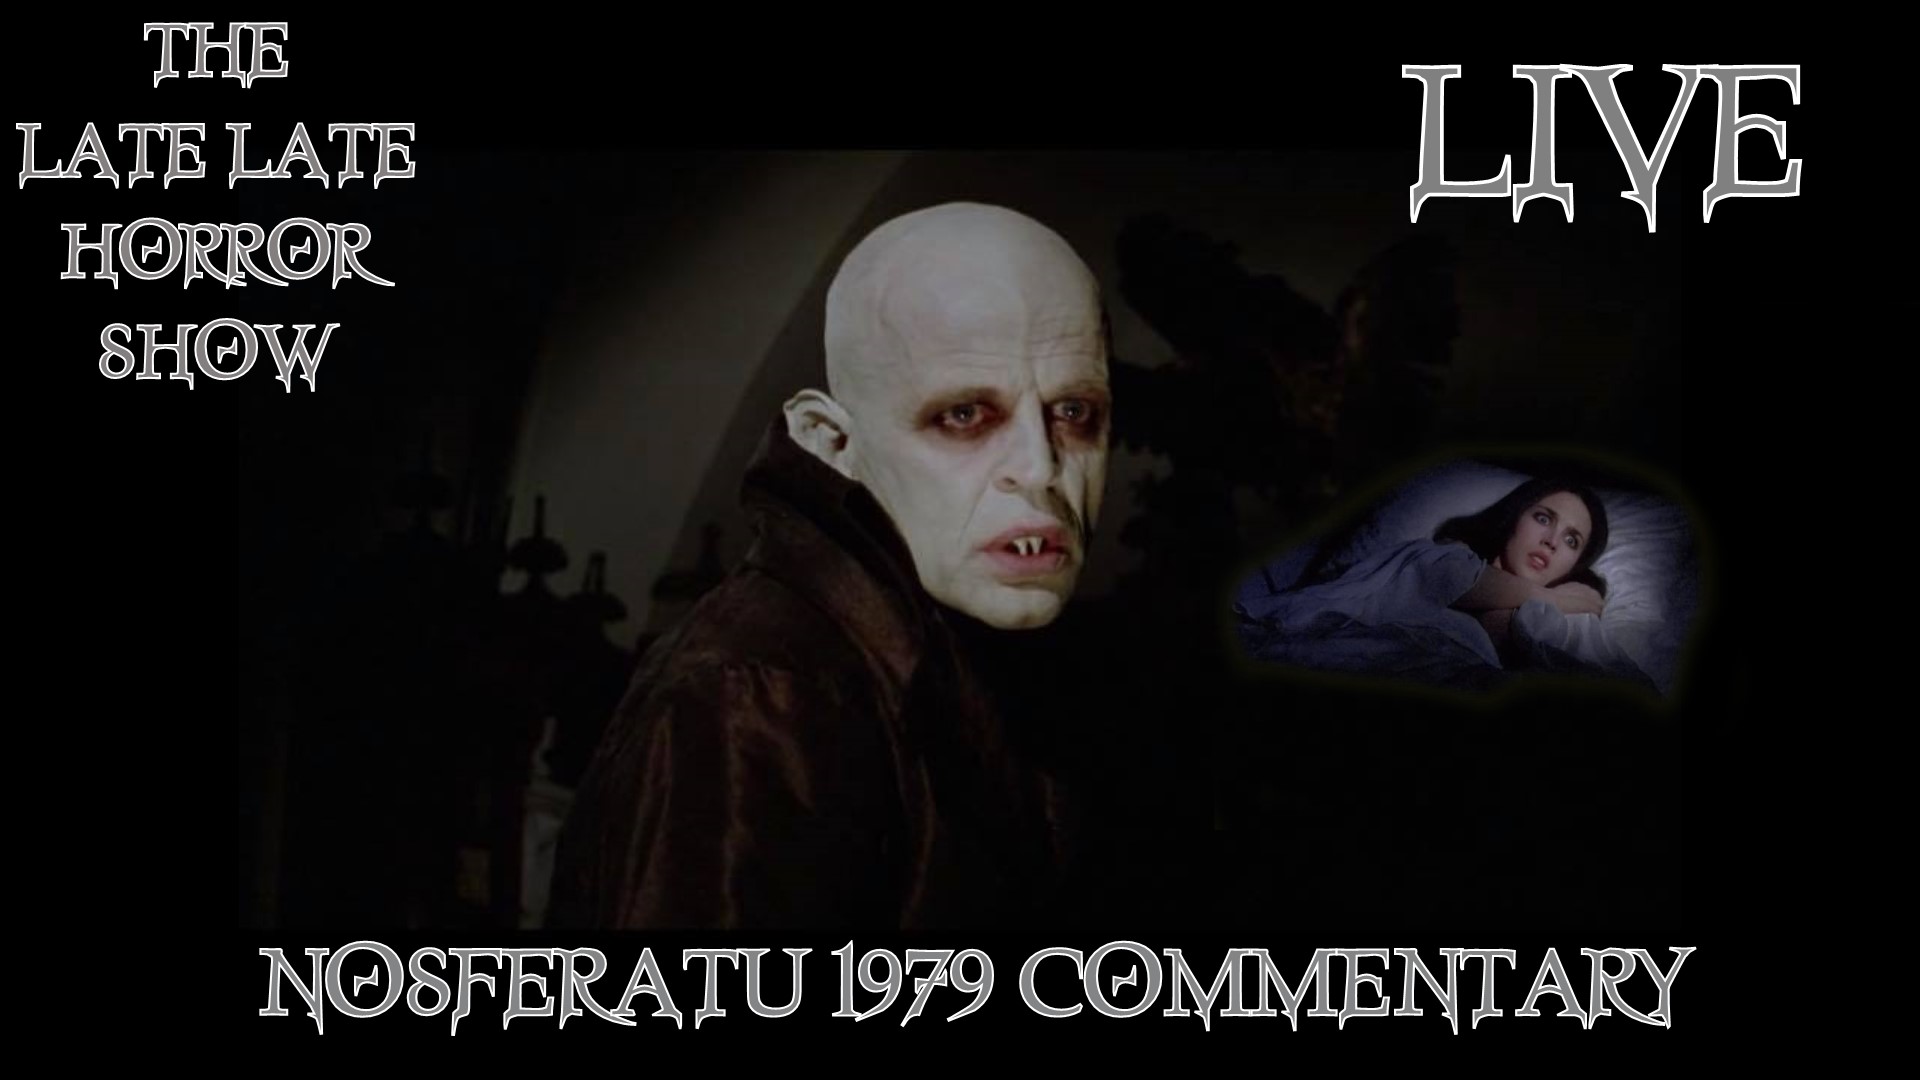 THE LATE LATE HORROR SHOW: DEMONIC TOYS 1992 FULL MOON COMMENTARY